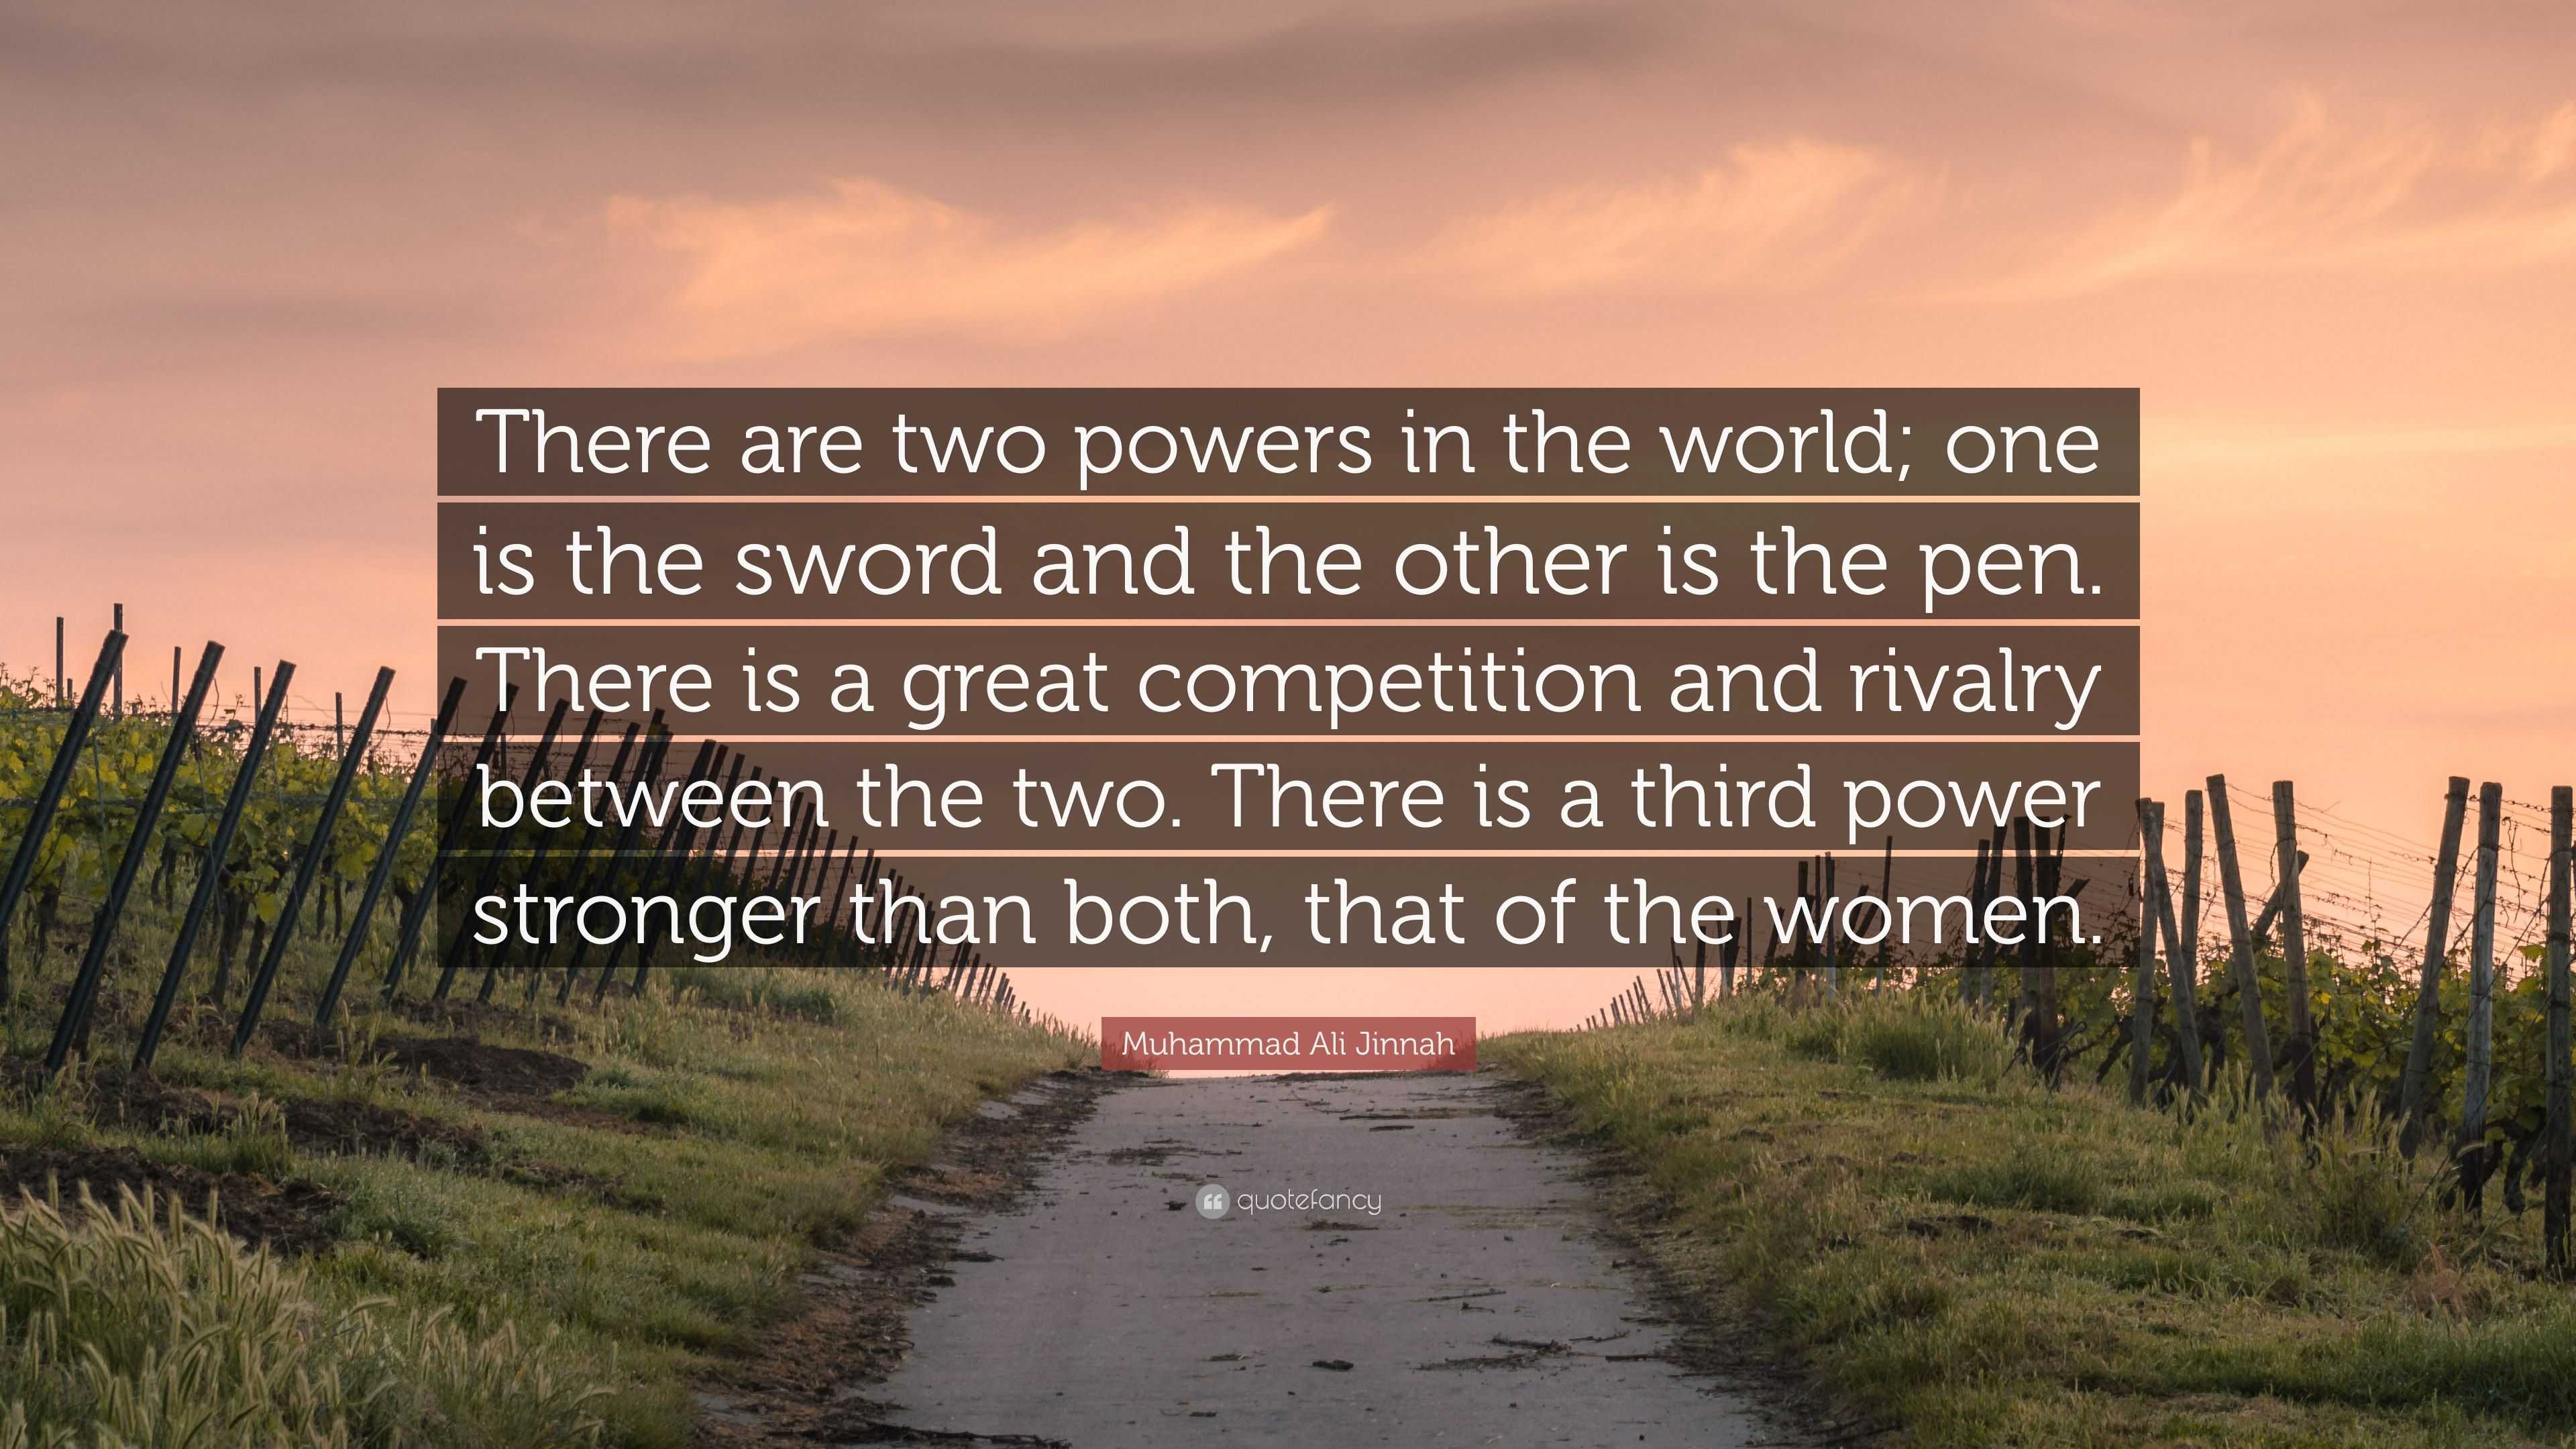 Muhammad Ali Jinnah Quote: "There are two powers in the ...